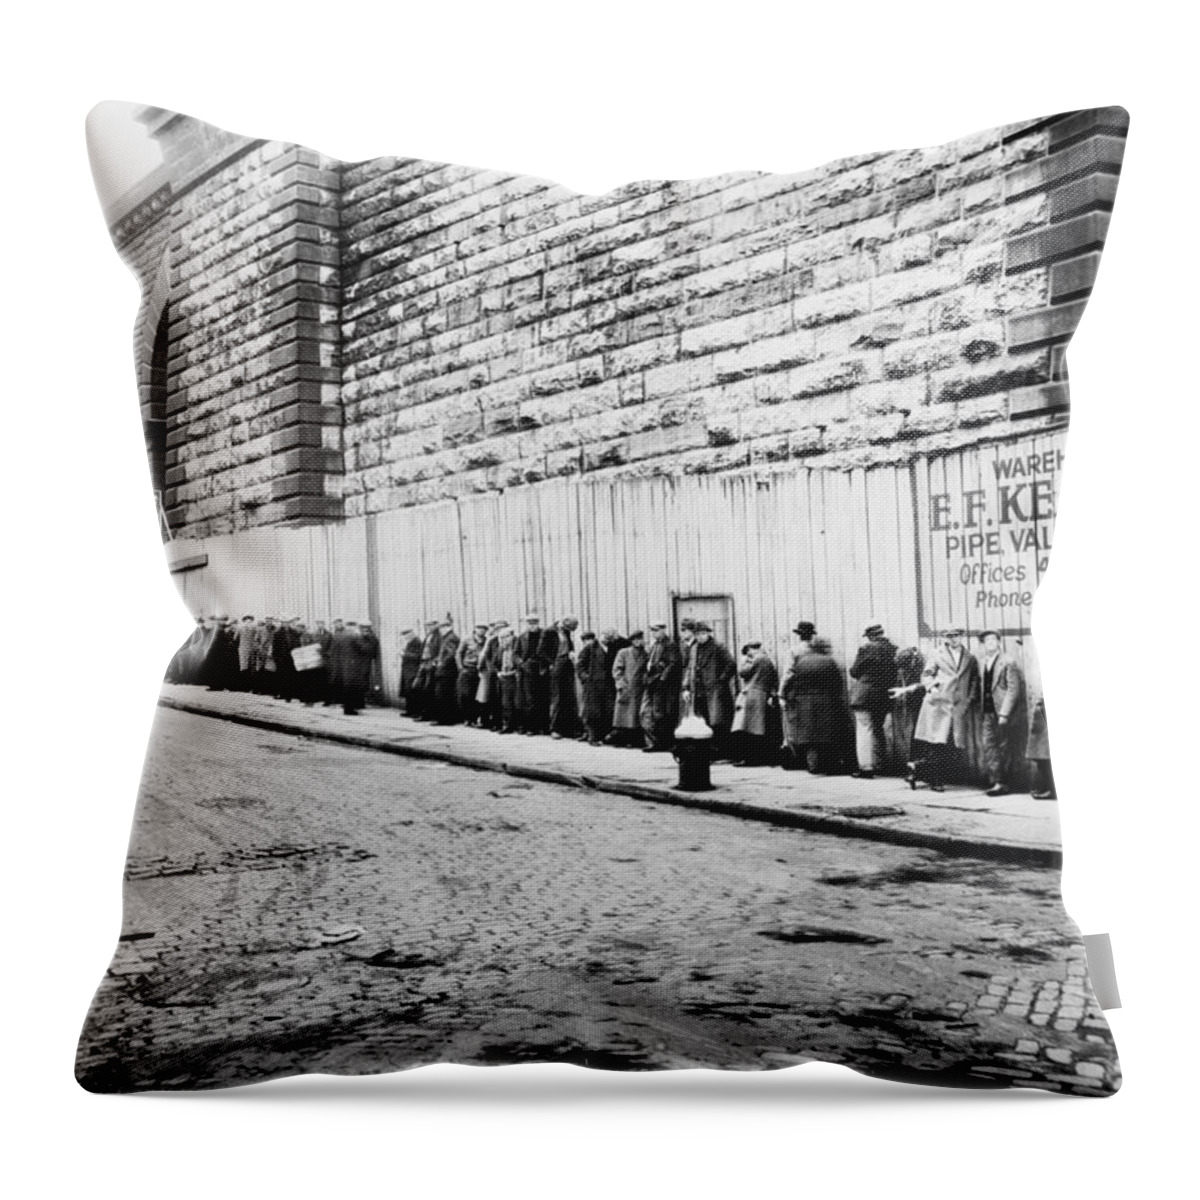 1930 Throw Pillow featuring the photograph New York City Bread Line #1 by Granger